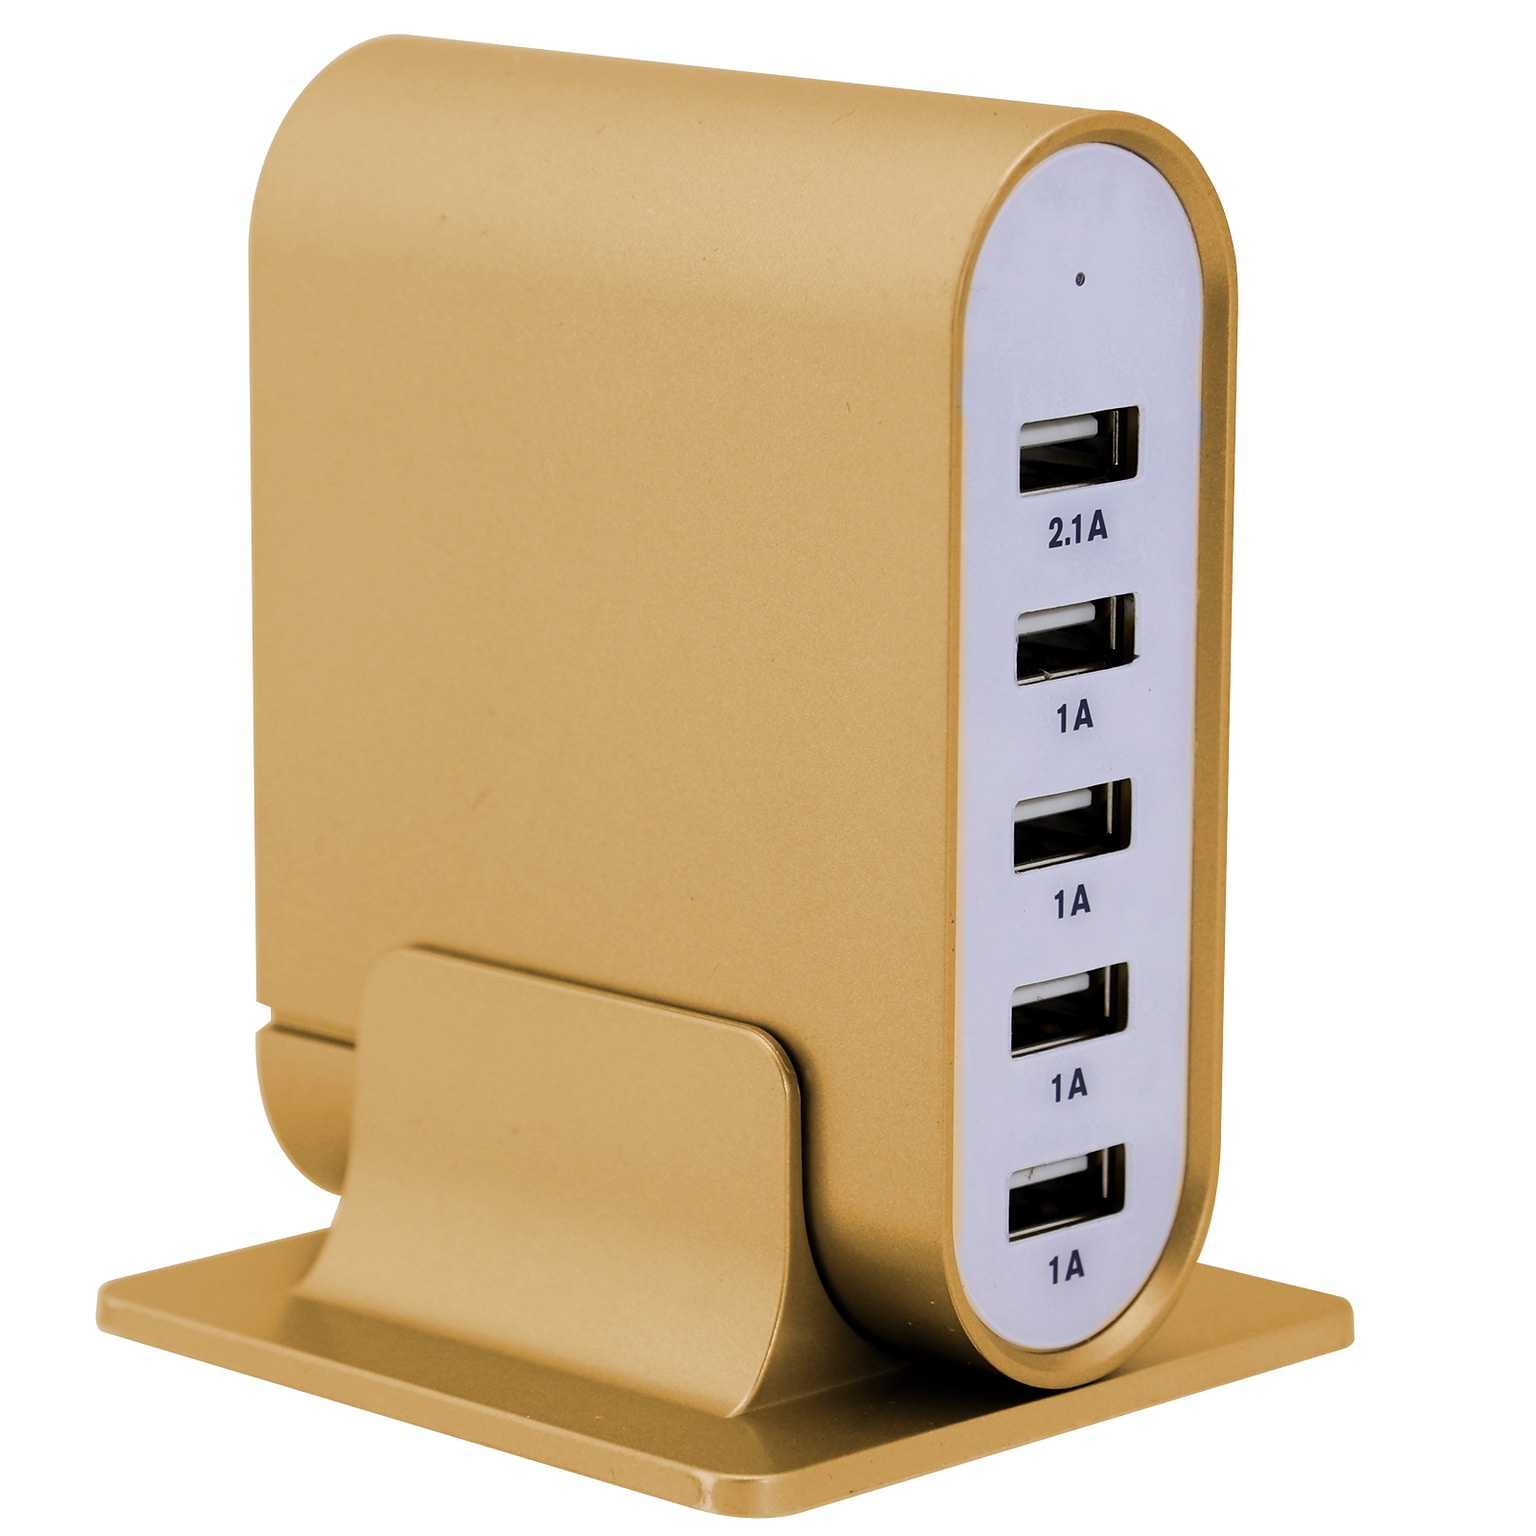 Trexonic USB-A Charging Station, Gold (936105179M)